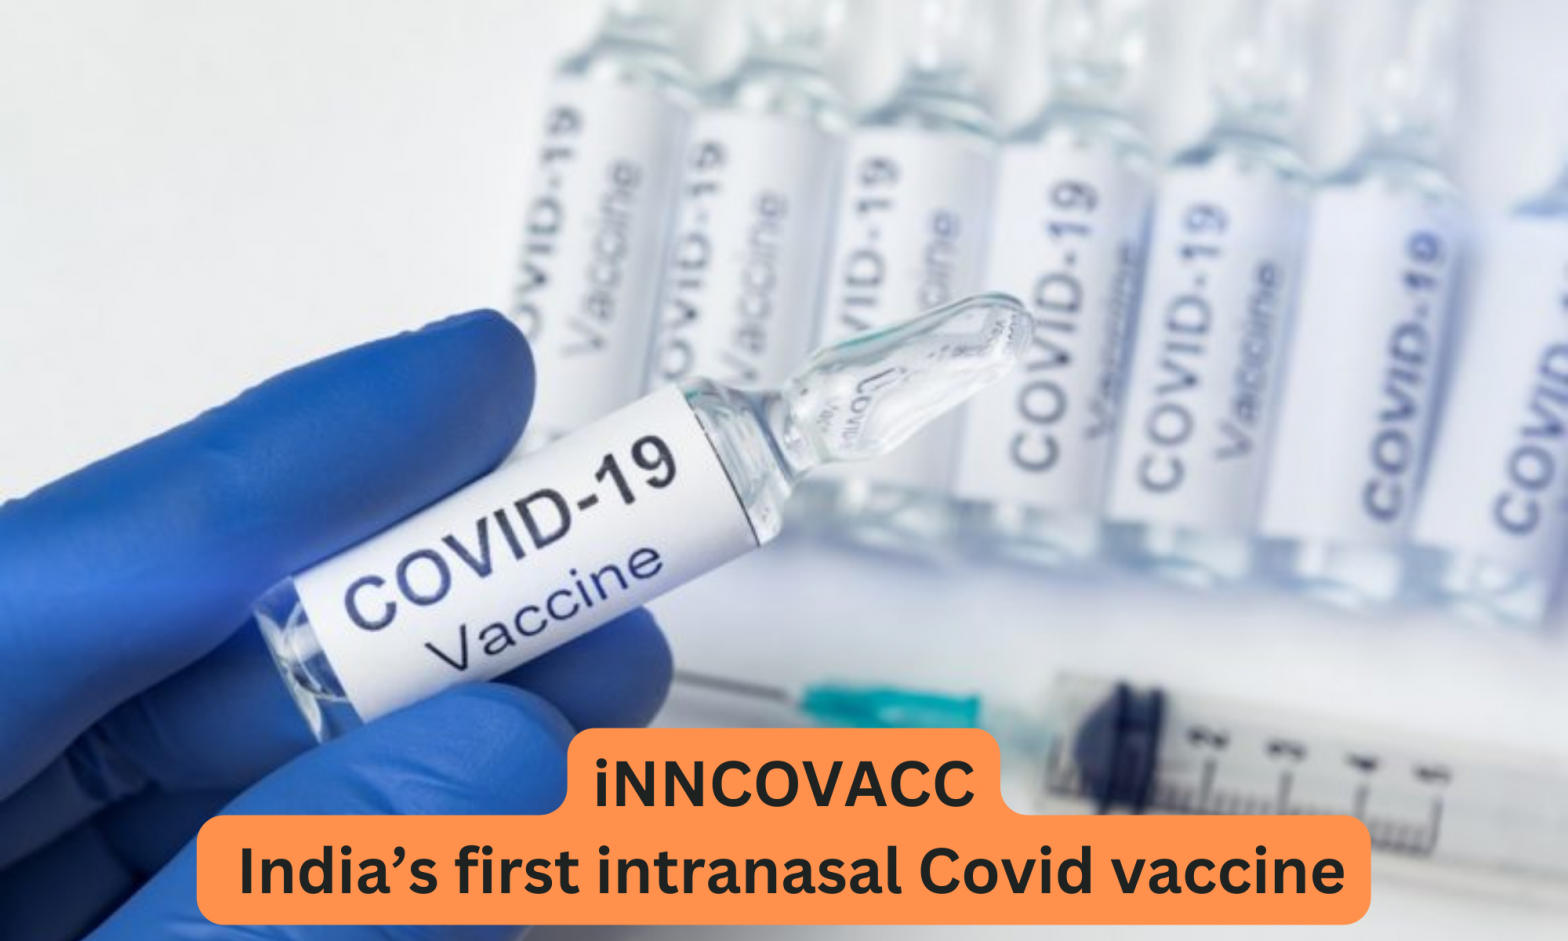 iNNCOVACC - India’s first intranasal Covid vaccine